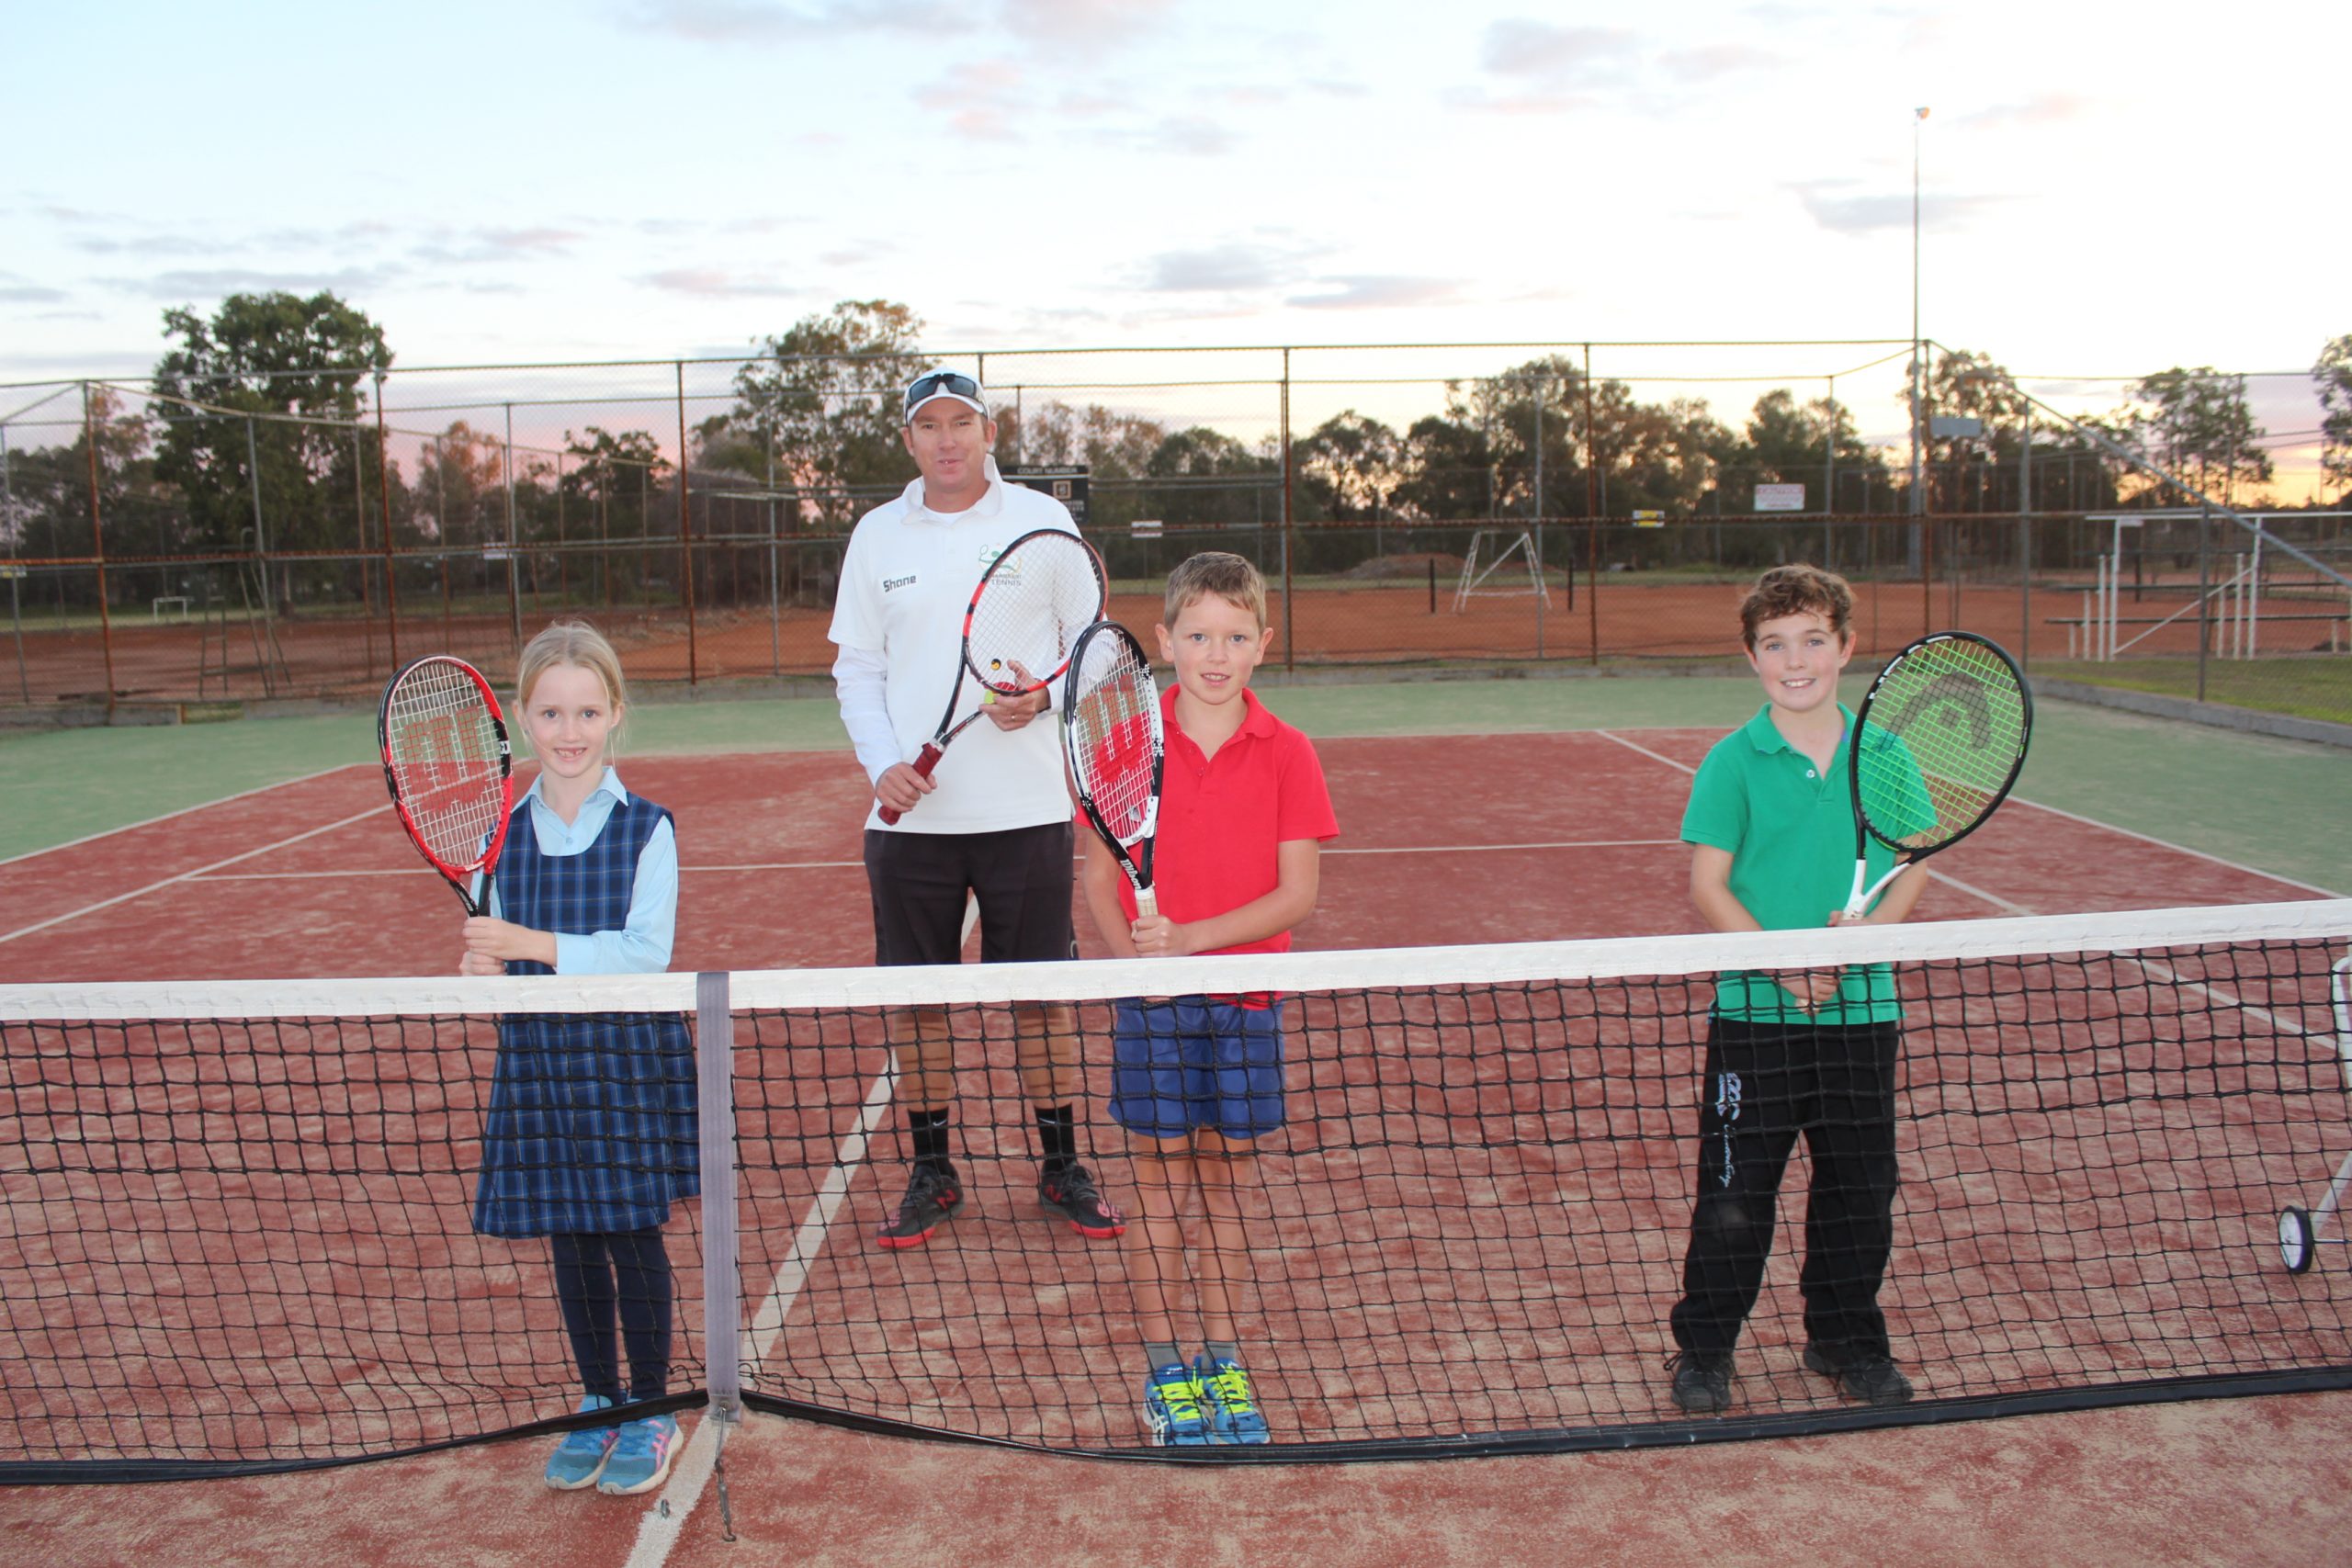 Group lessons return to the local Dangar Park courts